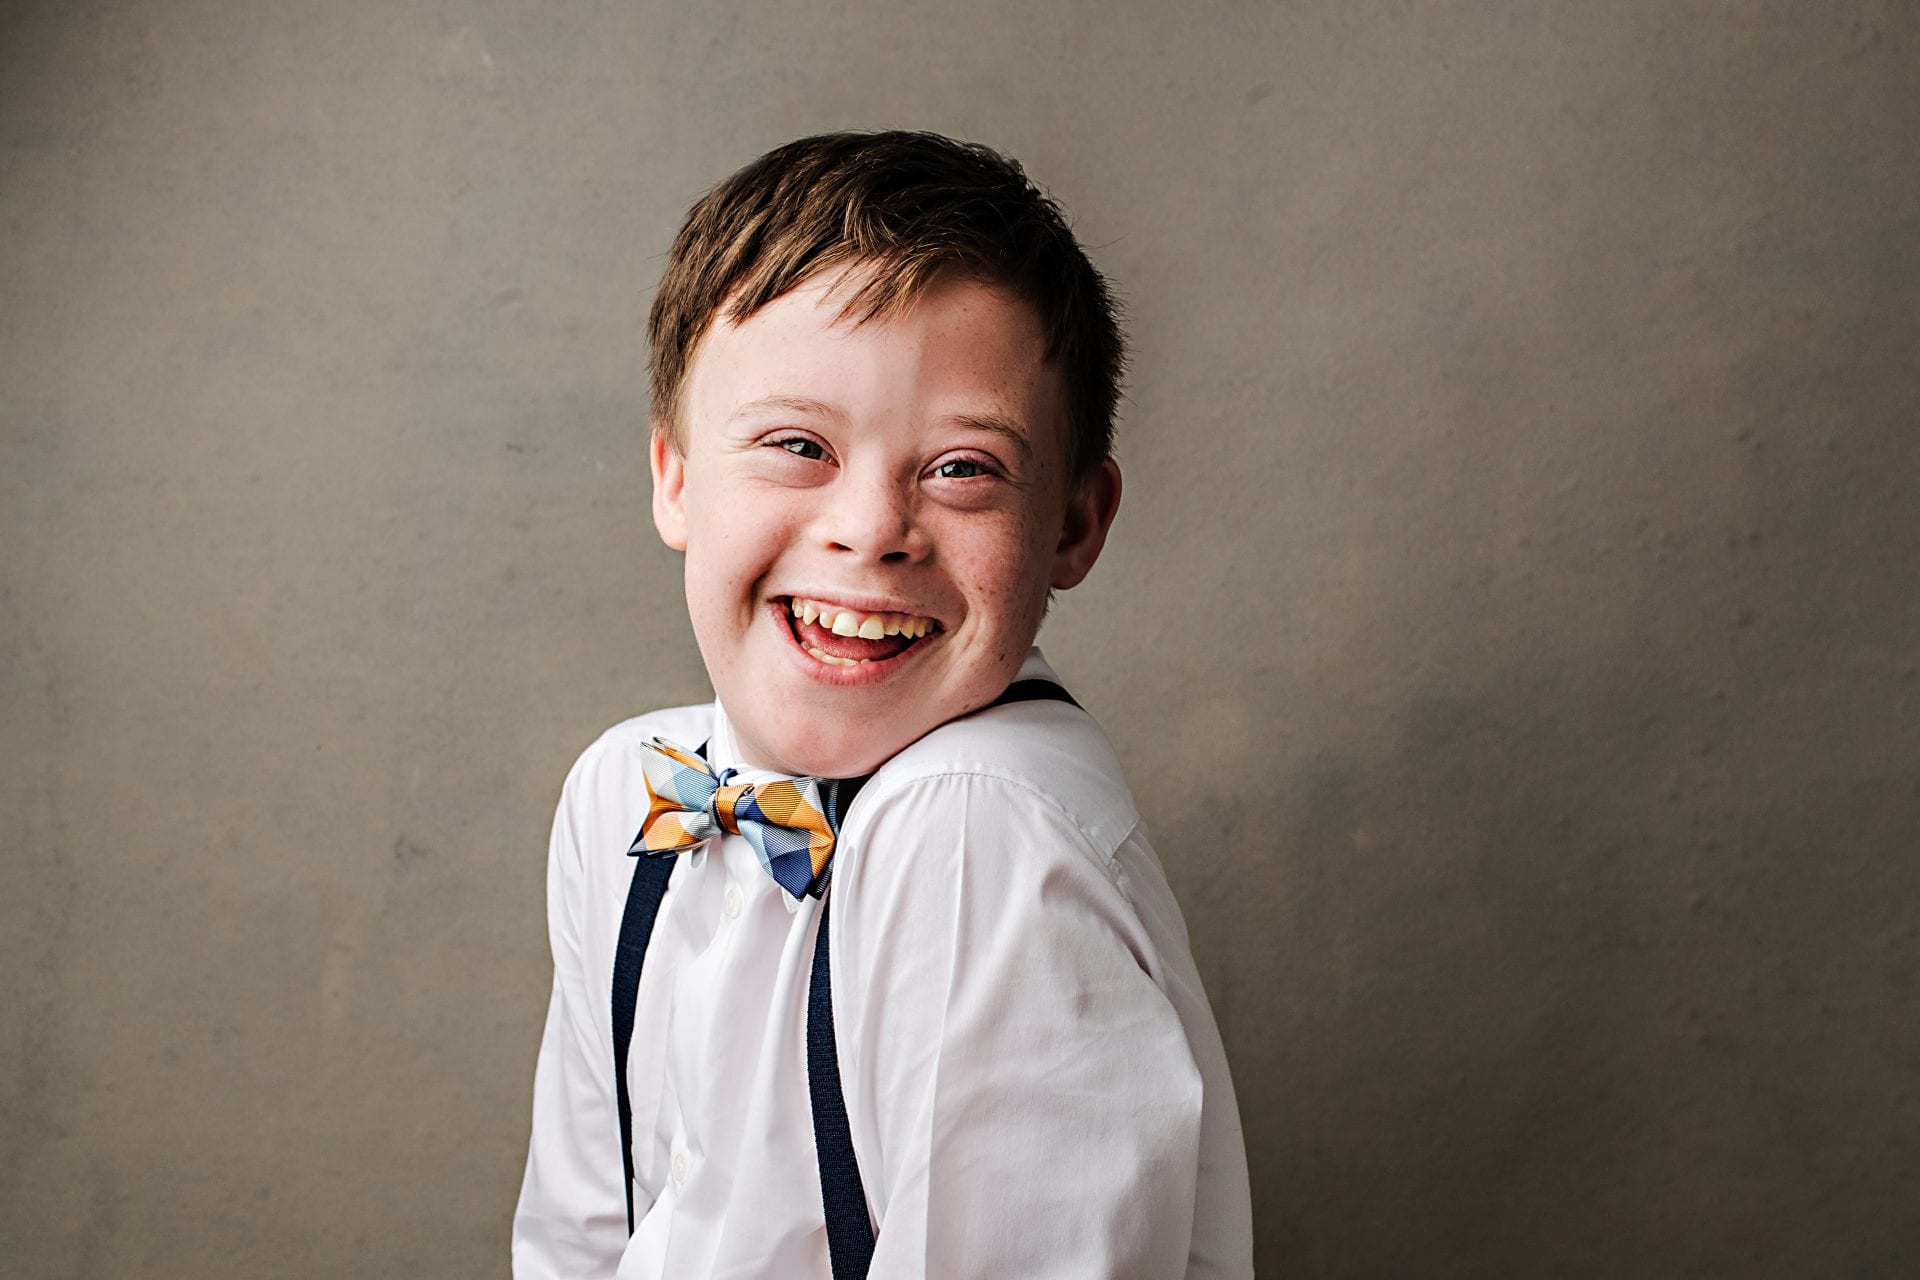 Photo essay challenges Down syndrome stereotypes | Broadview Magazine